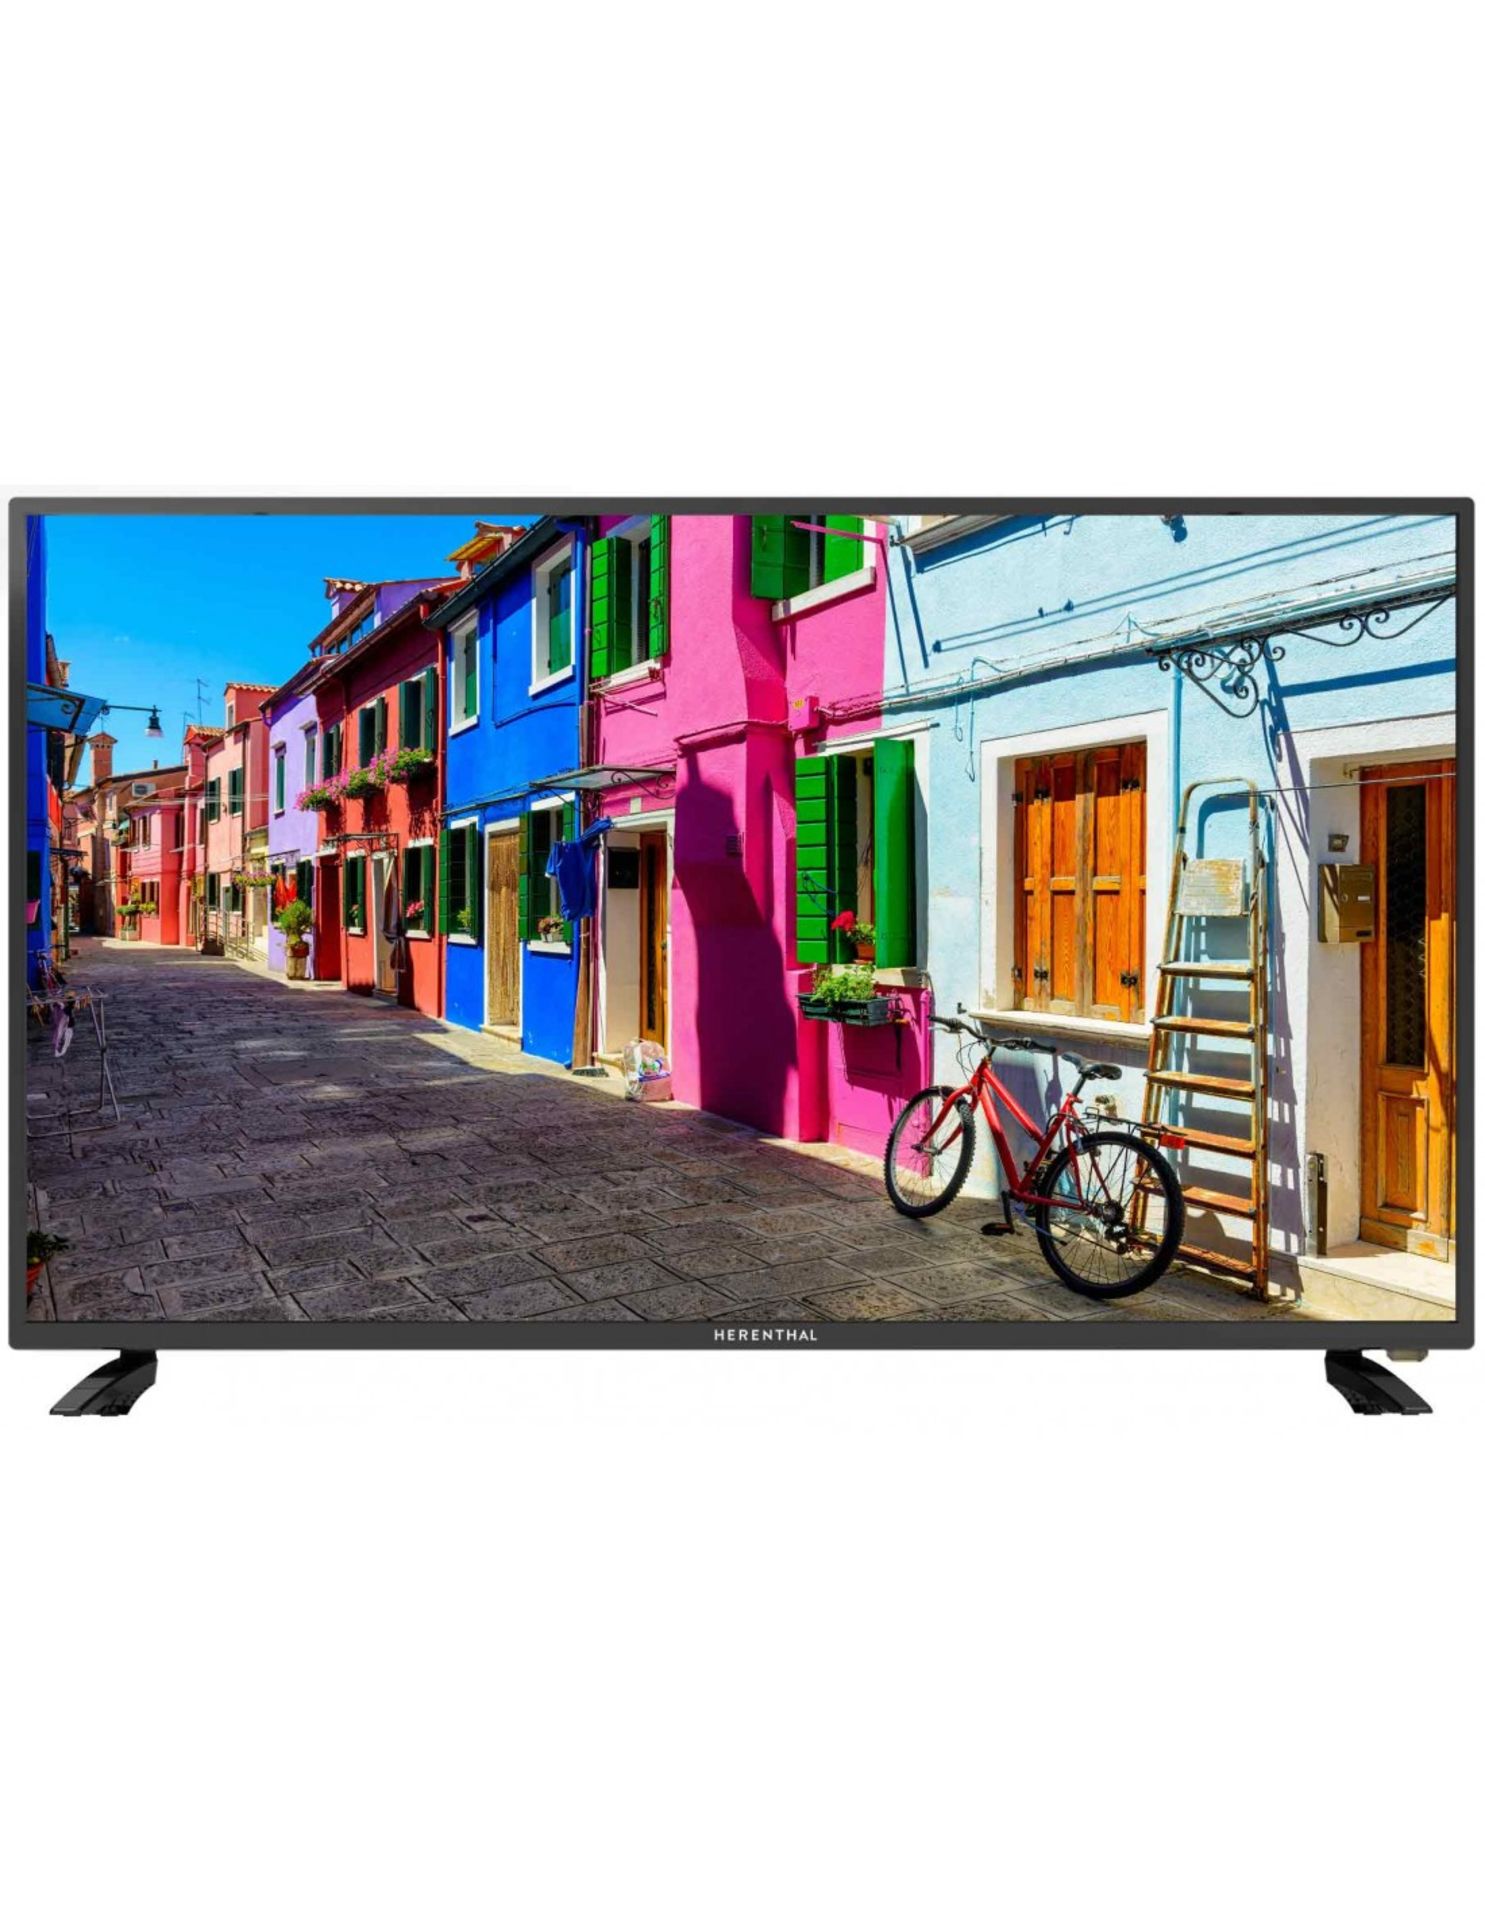 + VAT Brand New Herenthal 40" Smart TV - Full HD - EU To UK Adapter Required